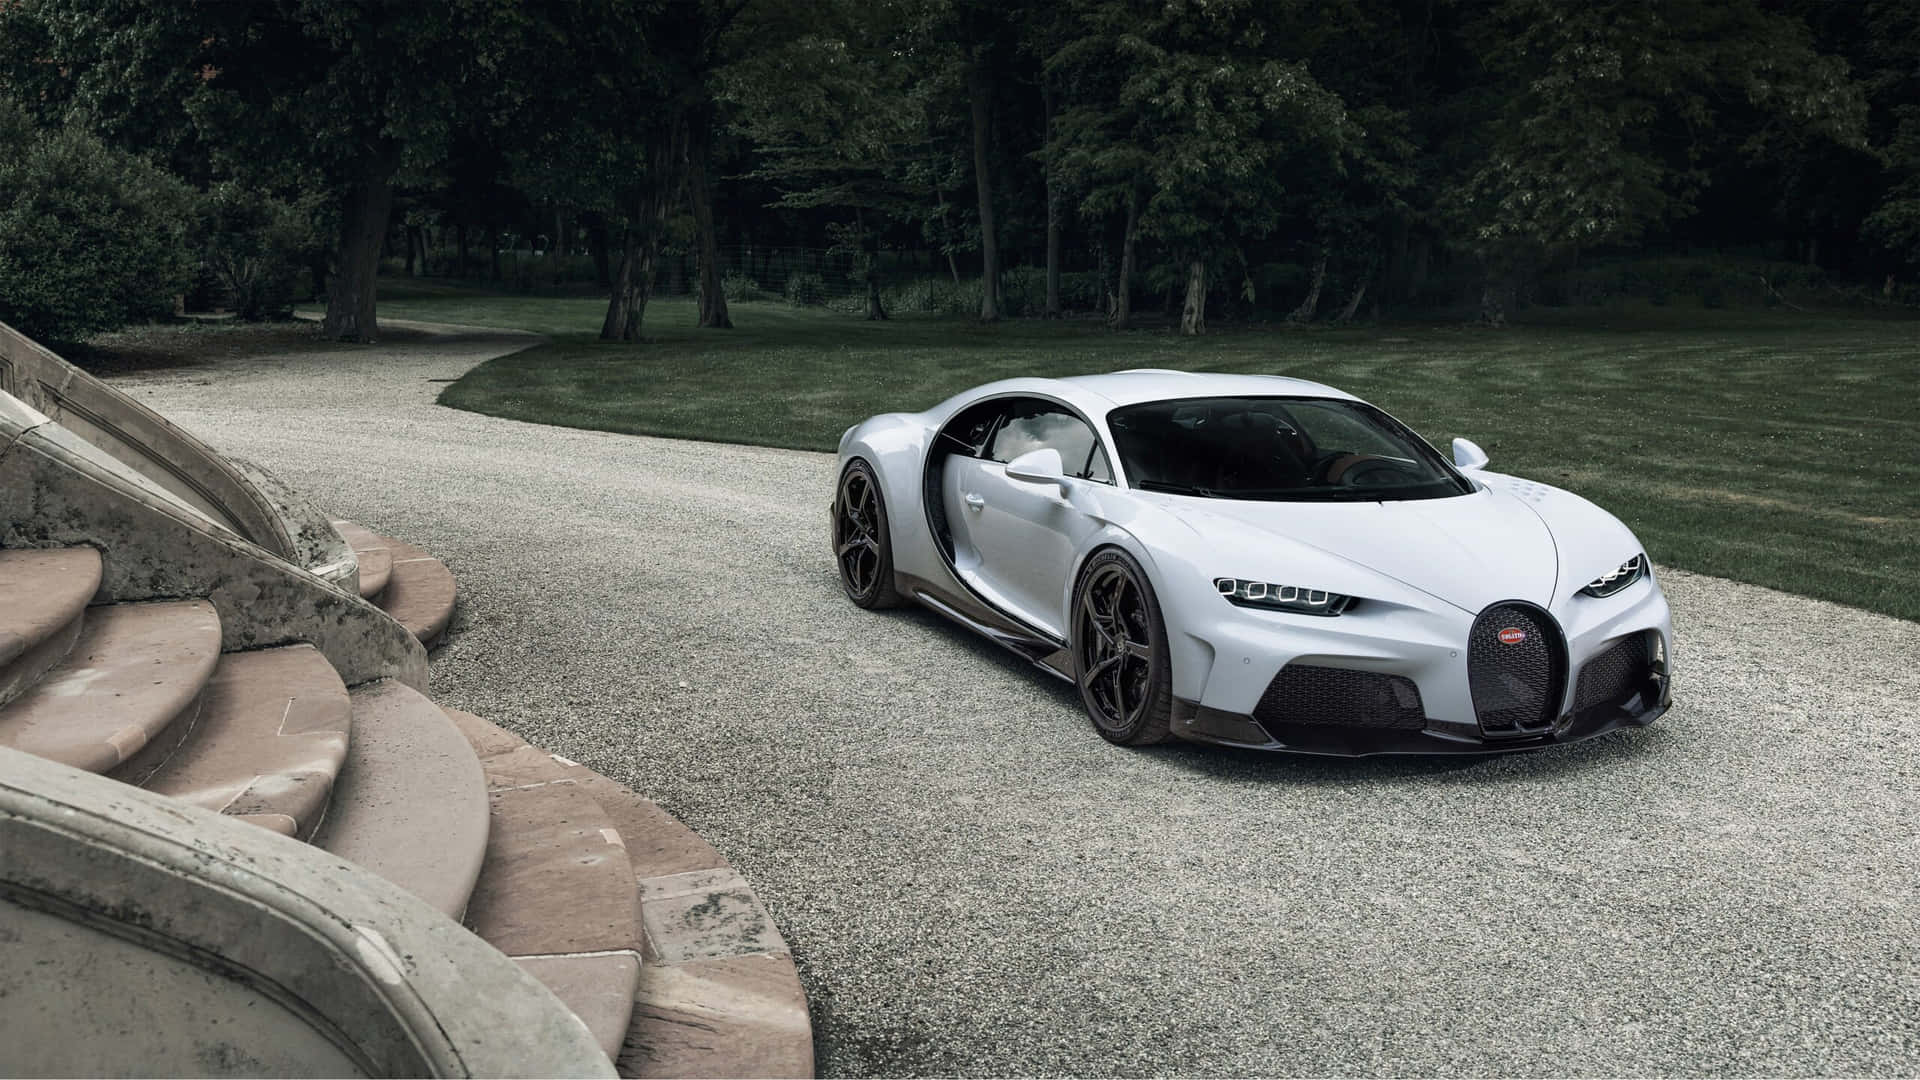 The White Bugatti Chiron Is Parked On A Path